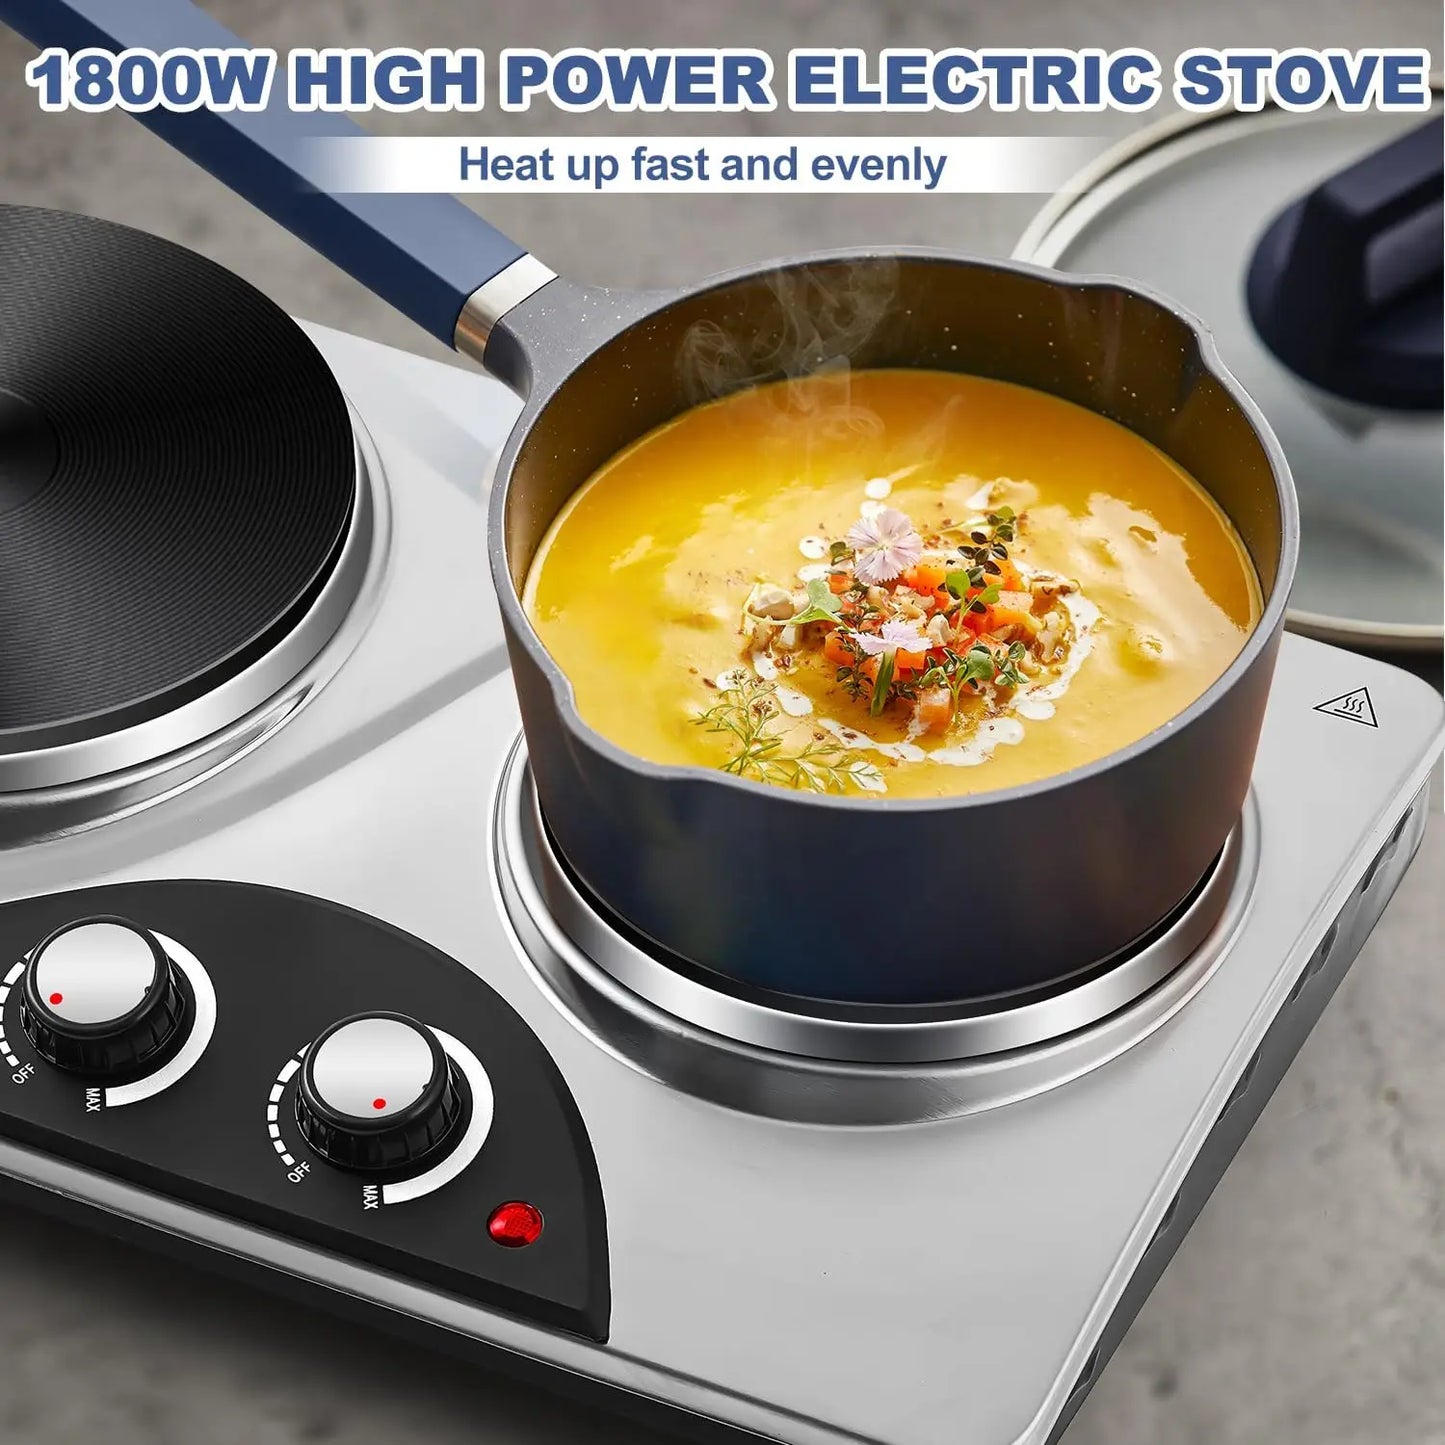 1800W Double Burner Portable Electric Stove